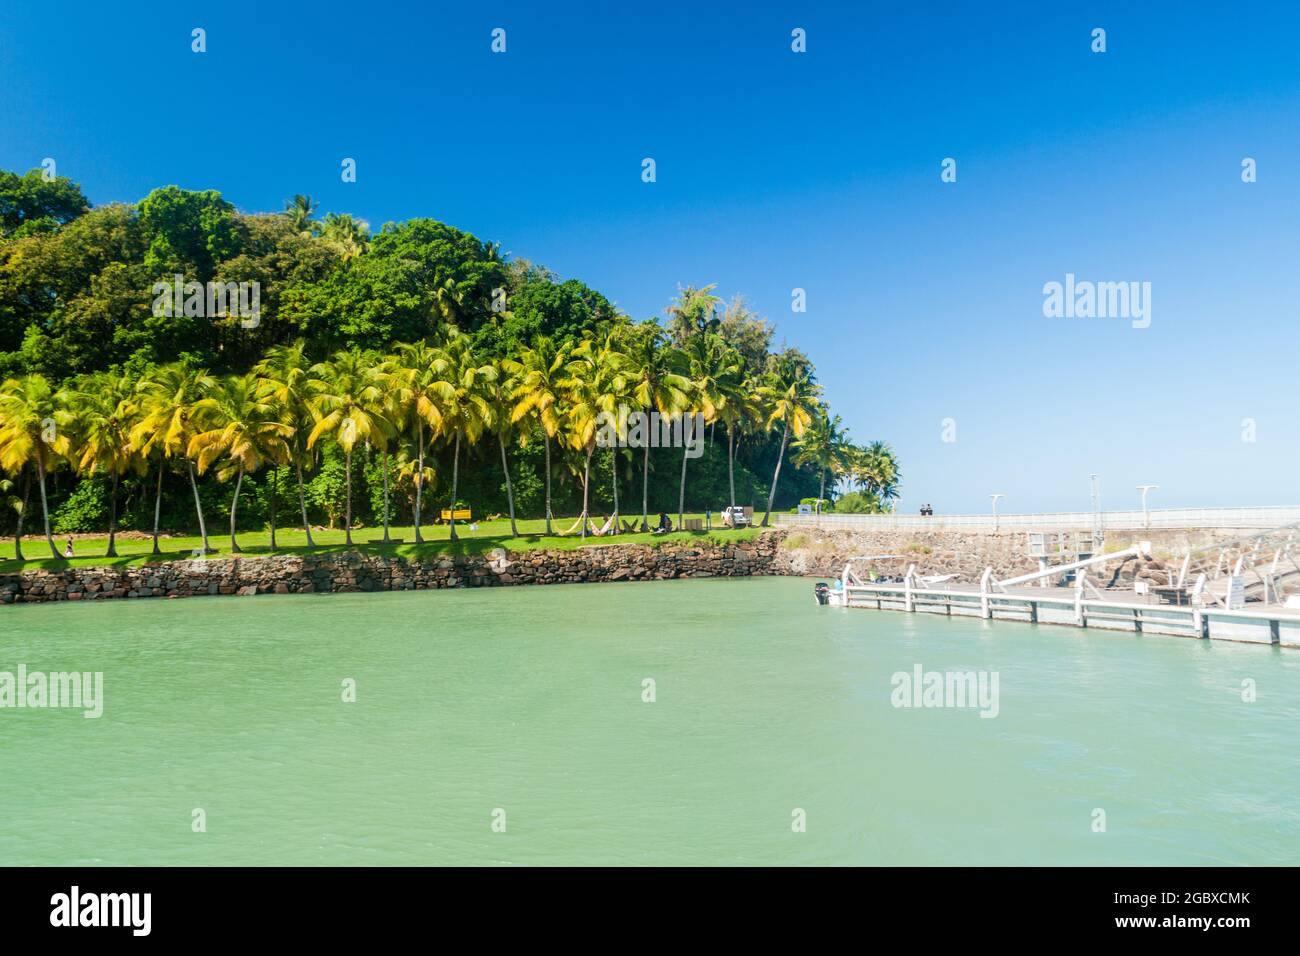 Pier at Ile Royale, one of the islands of Iles du Salut (Islands of Salvation) in French Guiana. Stock Photo